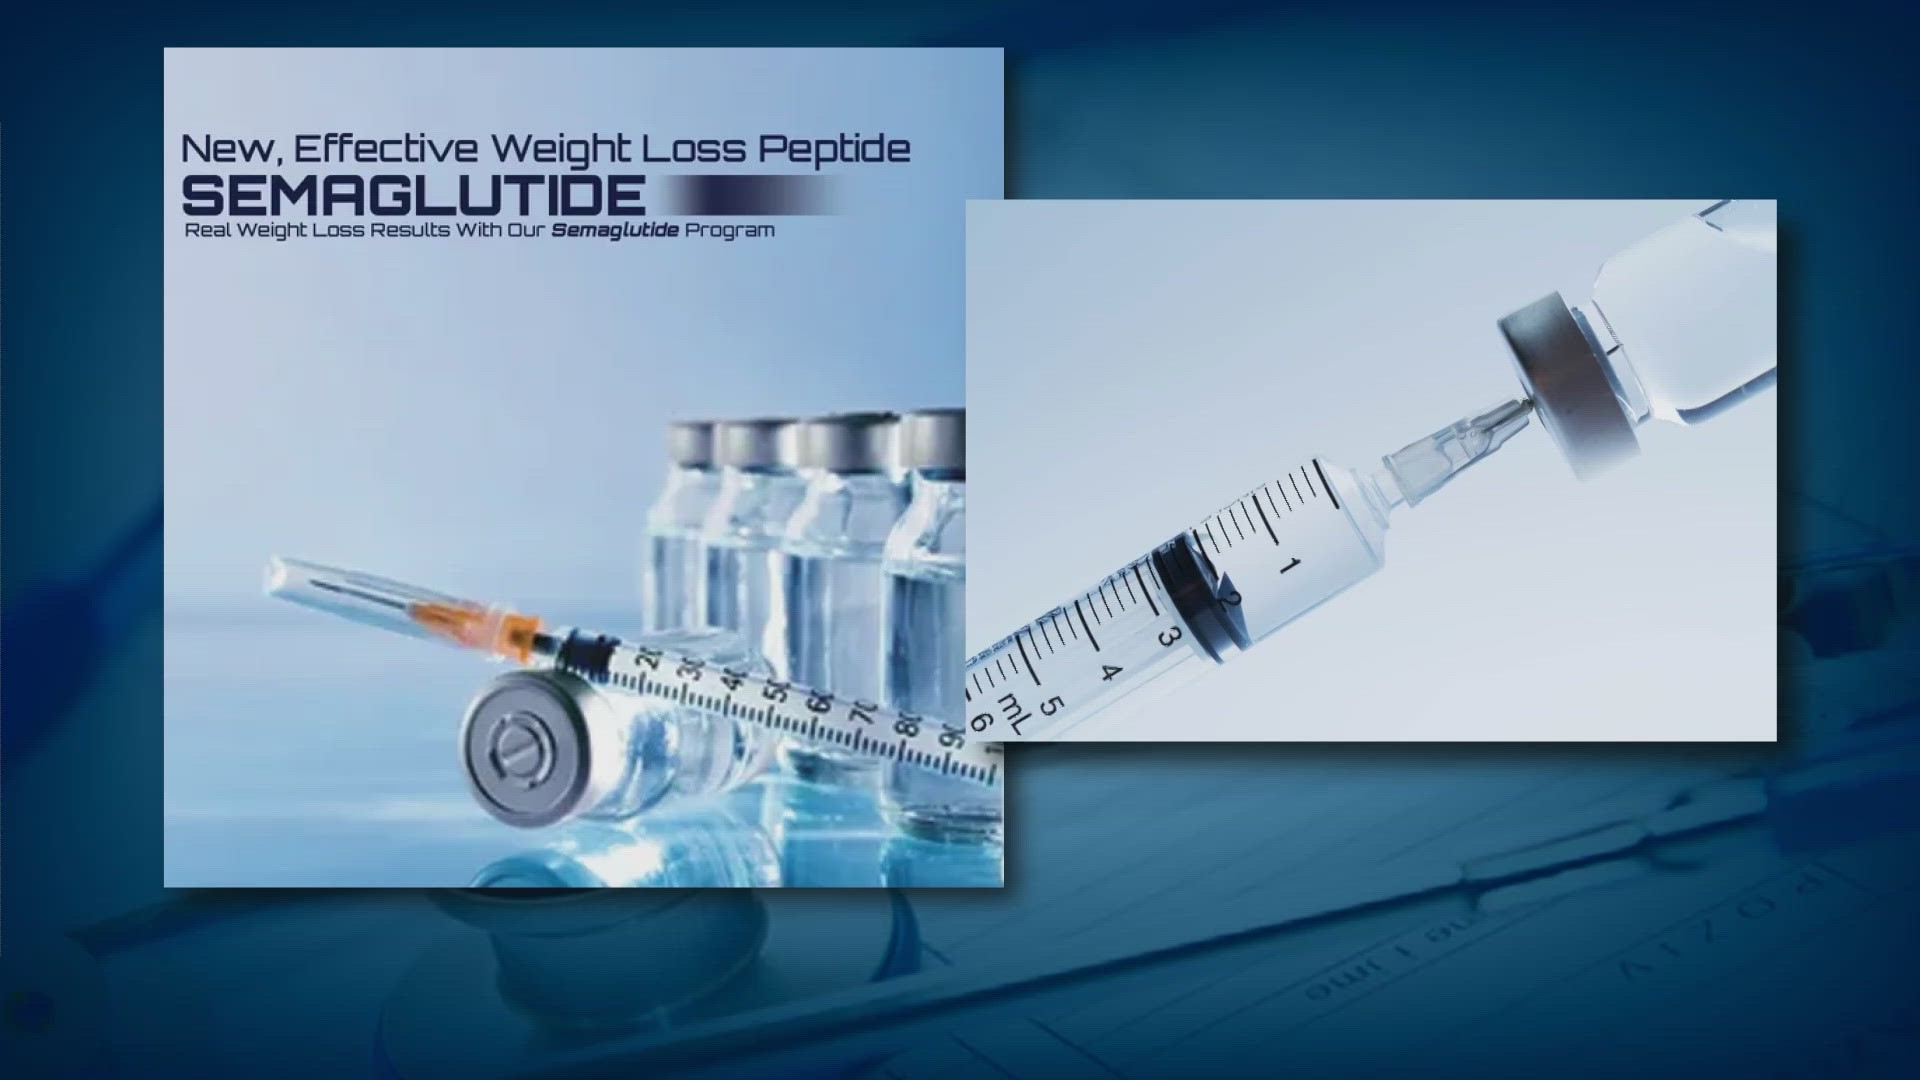 On this week's edition of Weight Loss Wednesday, WWL-TV's Meg Farris looks into antidiabetic injections that could be a game-changer for shedding pounds.